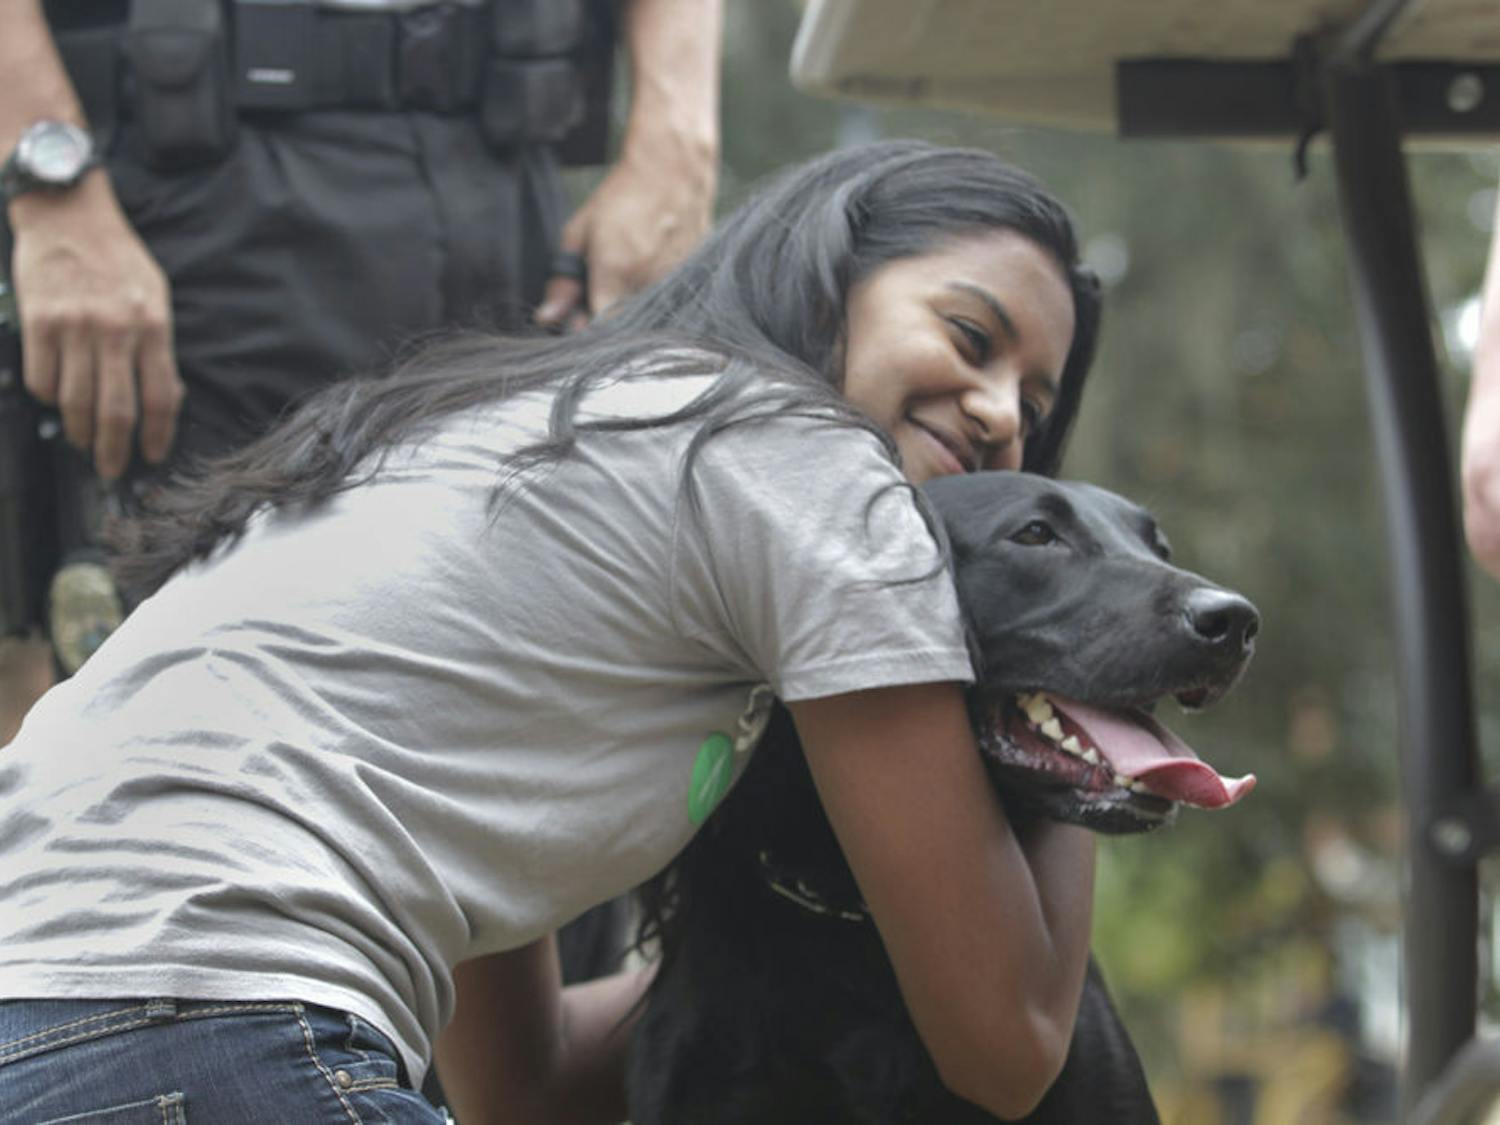 Leeashaa Ramoutar hugs Boomer, a 2 1/2-year-old black lab and UPD explosive detection K9 on Oct. 6, 2015. Officer Dale Holmes brought Boomer to Get FRUVED’s stress management event on the Plaza of the Americas.